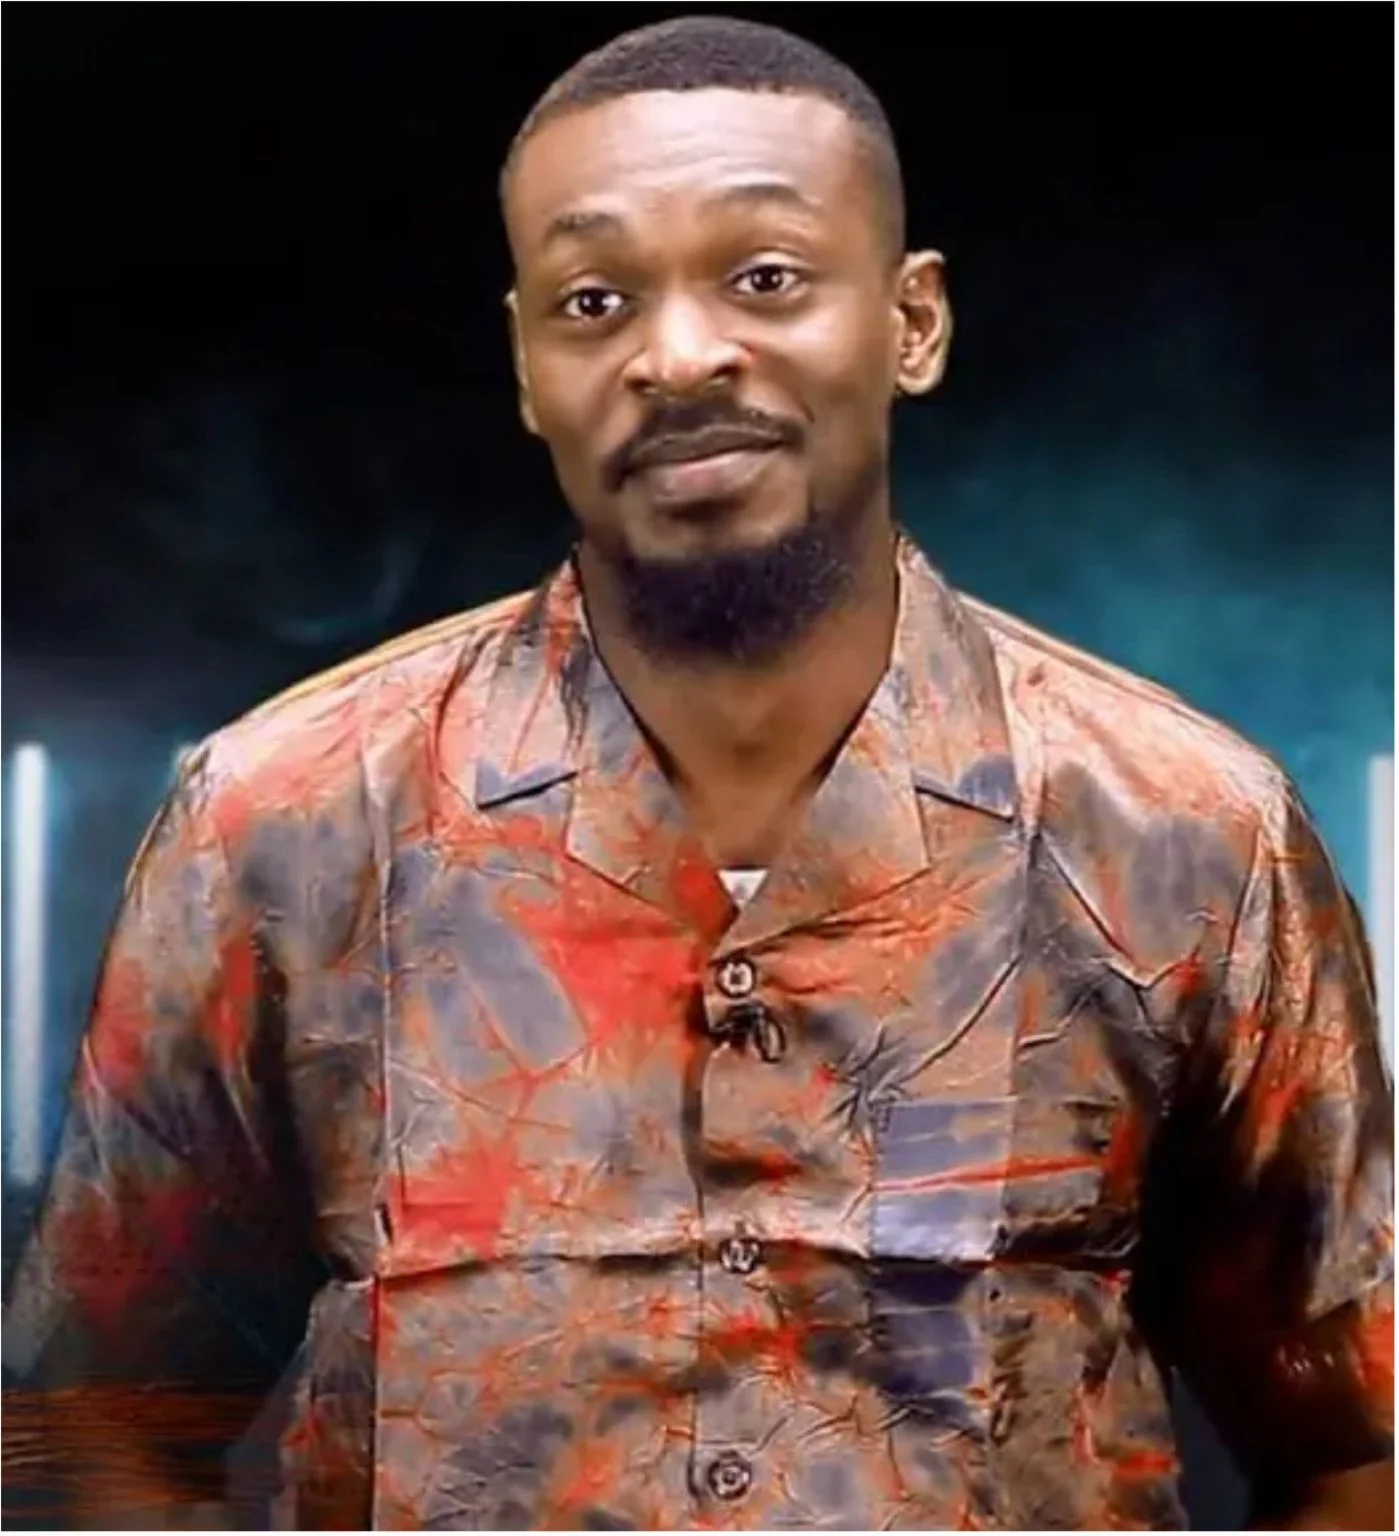 Big Brother Naija reality show star, Adekunle Olopade, has asserted that colleague, Doyinsola Anuoluwapo David, simply known as Doyin, “doesn’t think before she talks”. He said her mouth would get her in trouble someday. The reality star spoke in the latest episode of the To Be Honest podcast. Adekunle said, “Doyin is very insultive. It is who she is, her mouth will put her in trouble. And I can say it now because me and her are friends. She doesn’t think before she talks.” Pere who was also on the show confirmed that his relationship with Mercy Eke is genuine. “I like her [Mercy), like her, I like the sh*t outta her,” he said.